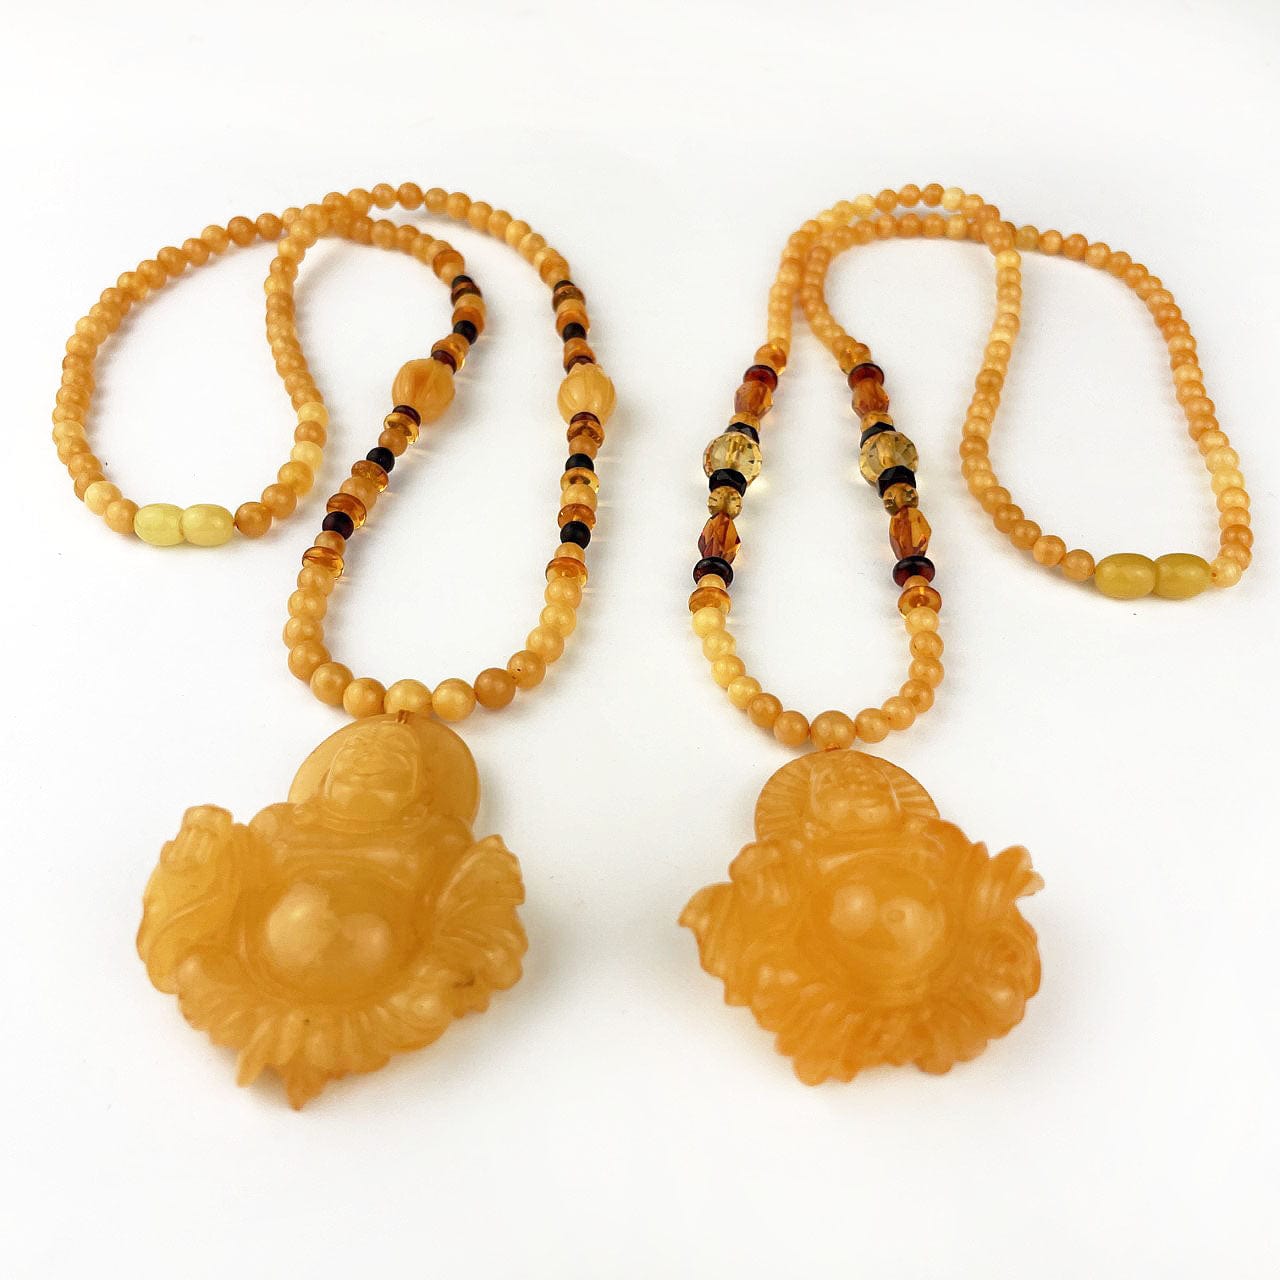 Amber Beaded Necklaces with Carved Buddha Pendants showing the carved buddhas at an angle so you can see the thickness